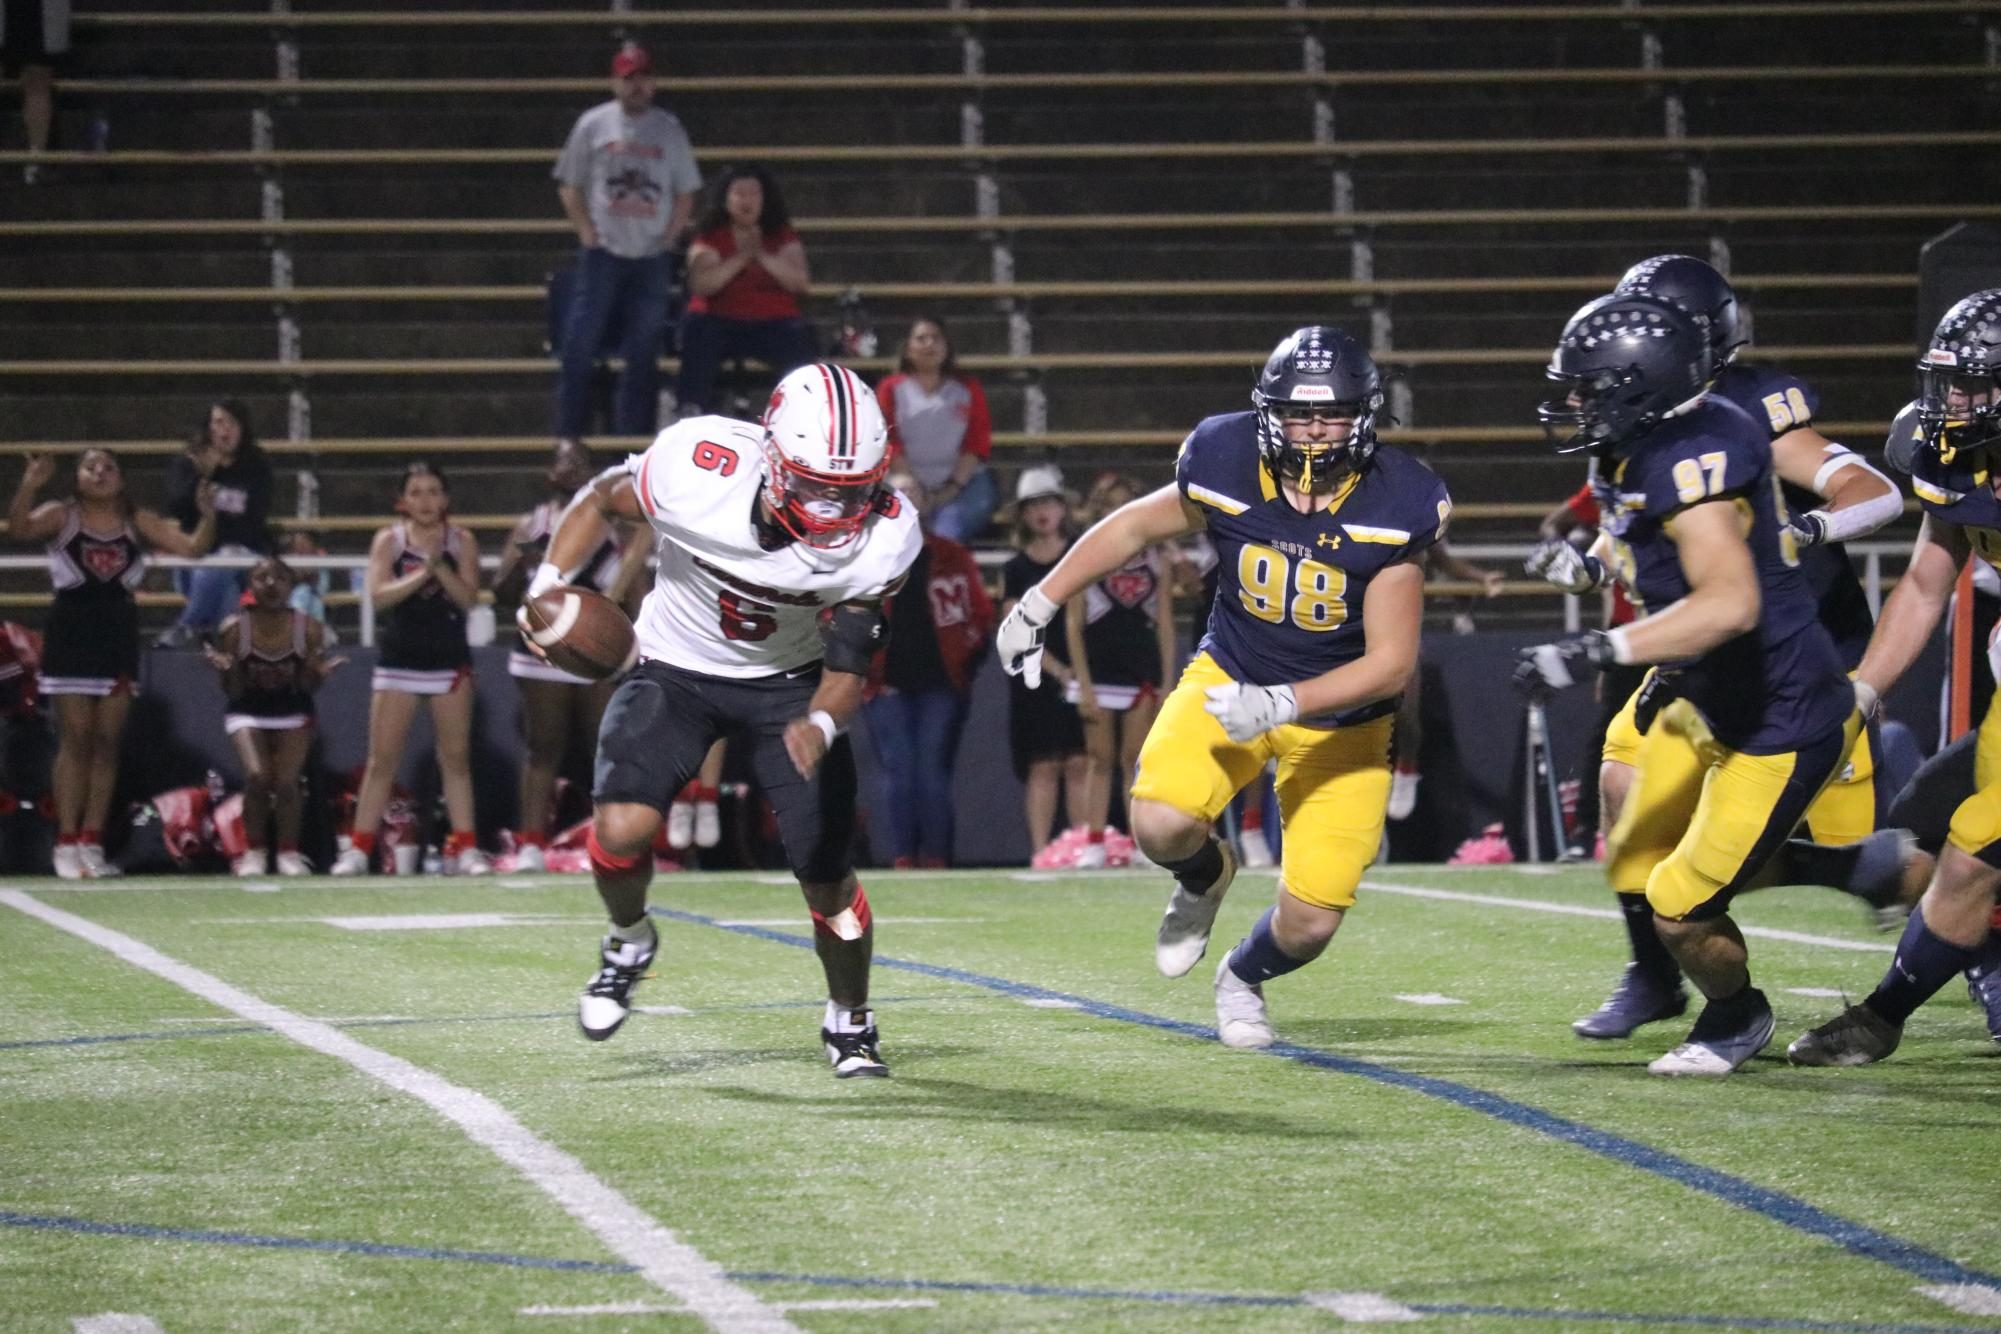 Highland Park Scots Extend Homecoming Win Streak with 24-14 Victory Against MacArthur Cardinals